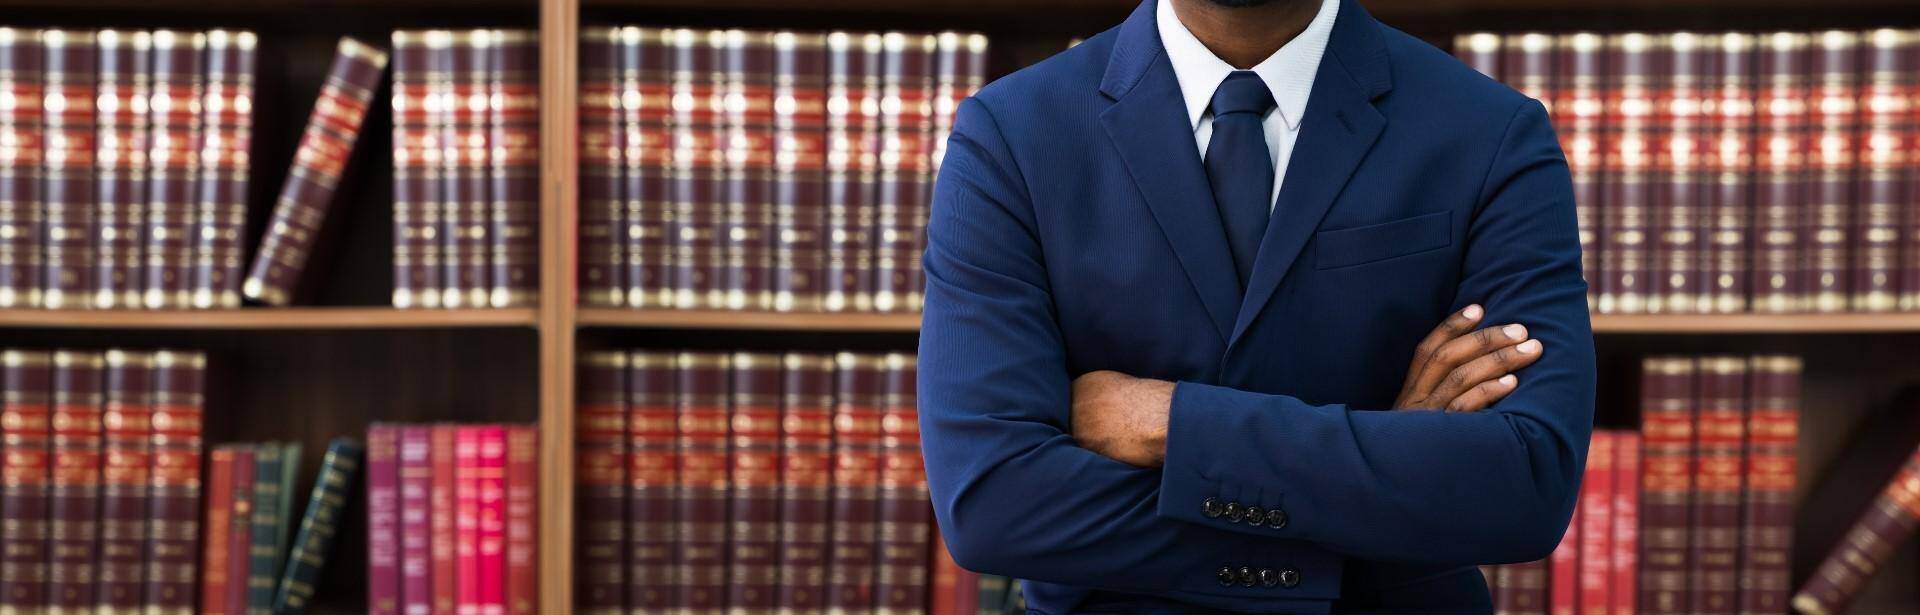 A black lawyer standing in front of a bookshelf of law book in Kennesaw, Georgia